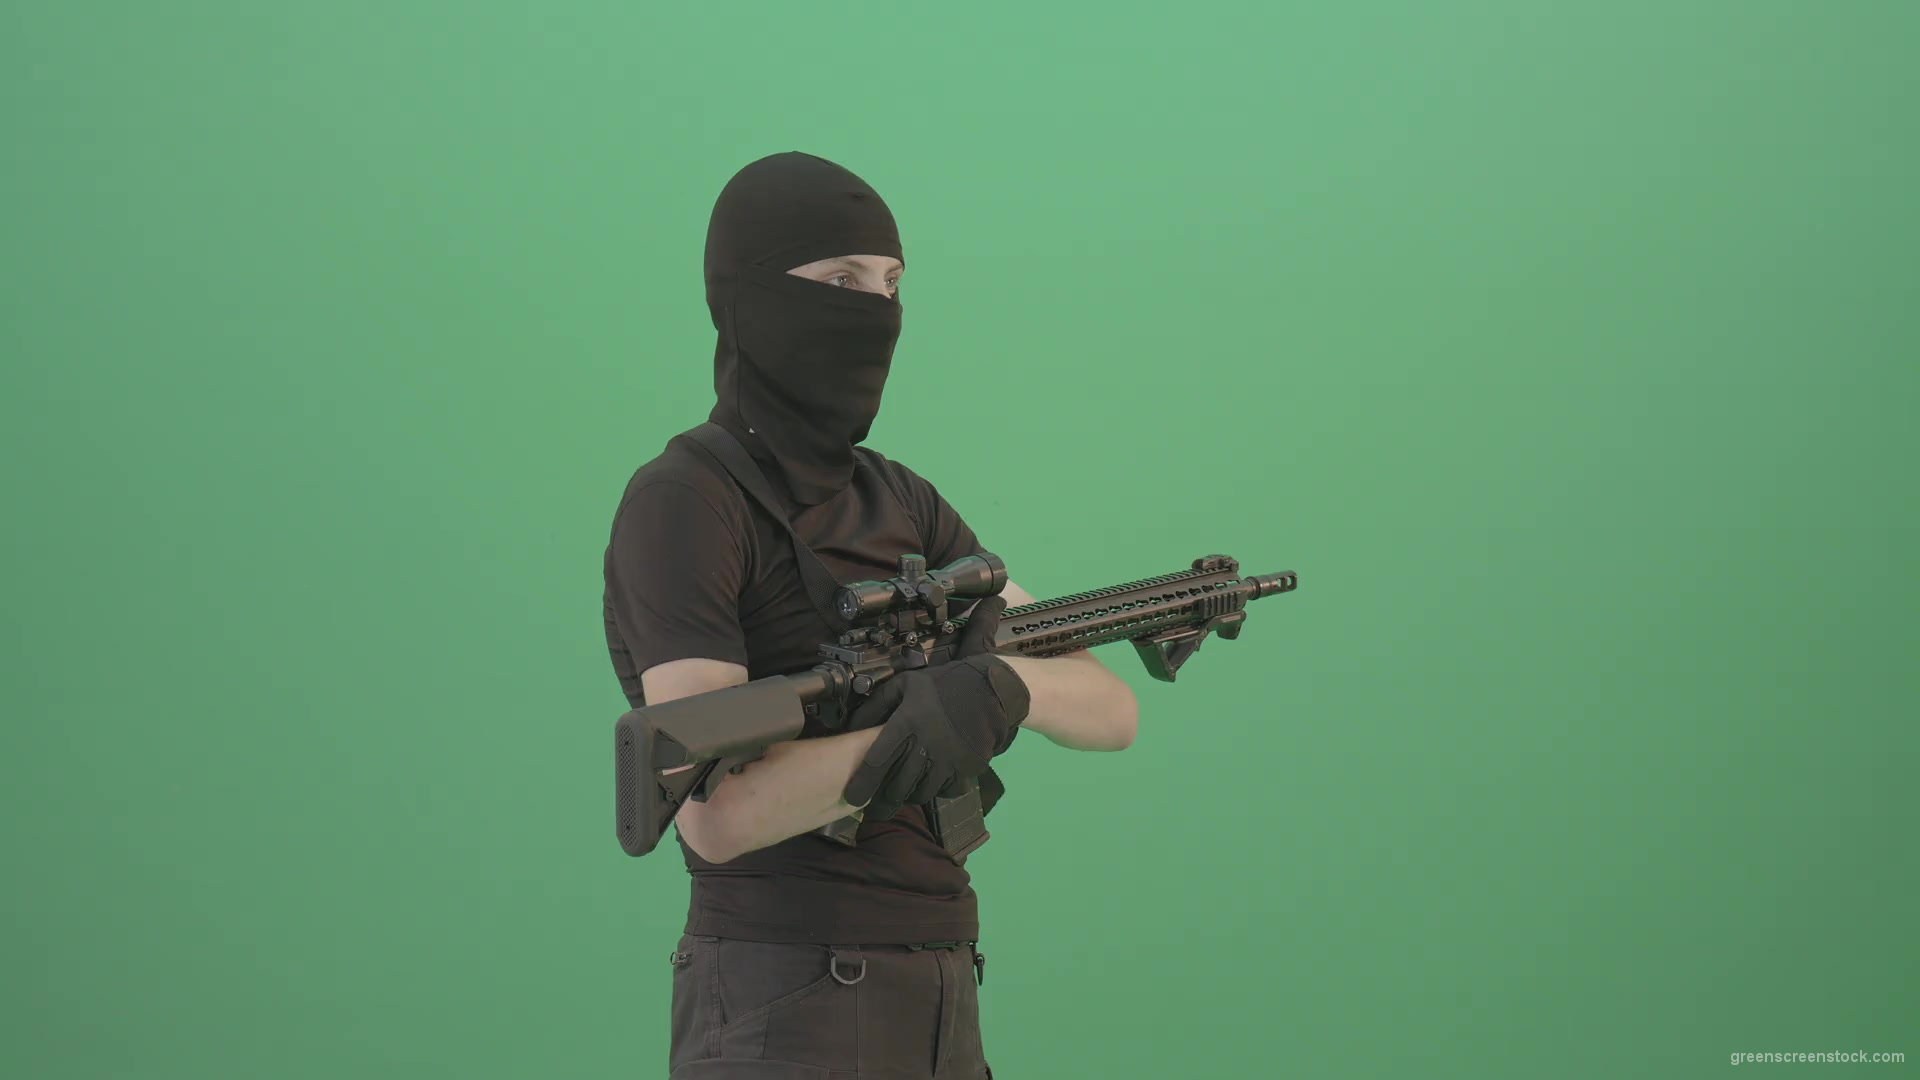 Soldier-man-with-weapon-looking-enemies-isolated-on-green-screen-4K-Video-Footage-1920_001 Green Screen Stock